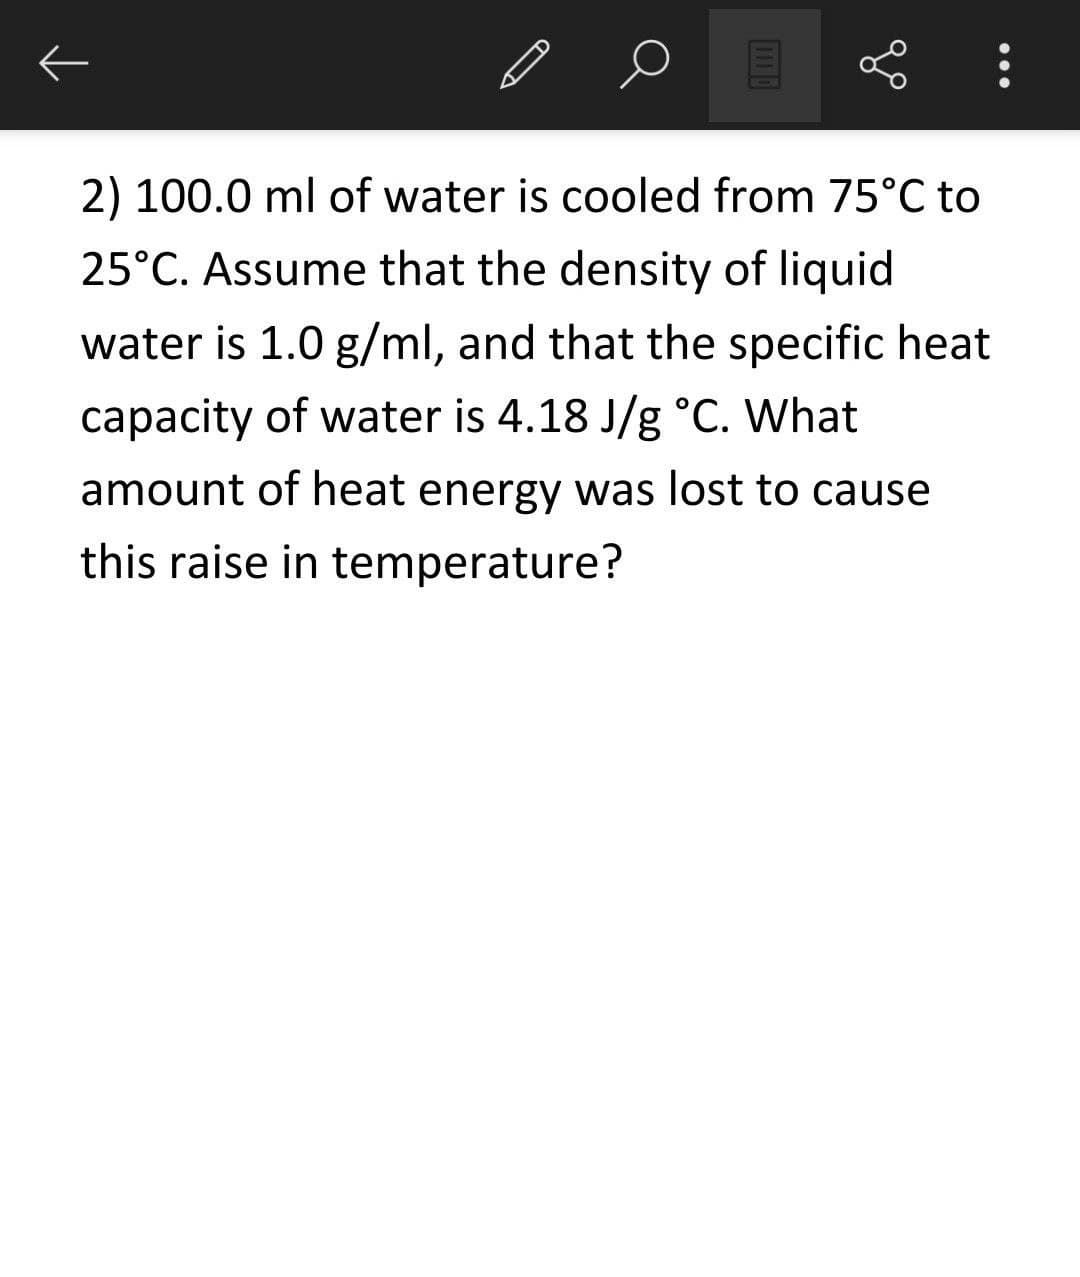 2) 100.0 ml of water is cooled from 75°C to
25°C. Assume that the density of liquid
water is 1.0 g/ml, and that the specific heat
capacity of water is 4.18 J/g °C. What
amount of heat energy was lost to cause
this raise in temperature?
